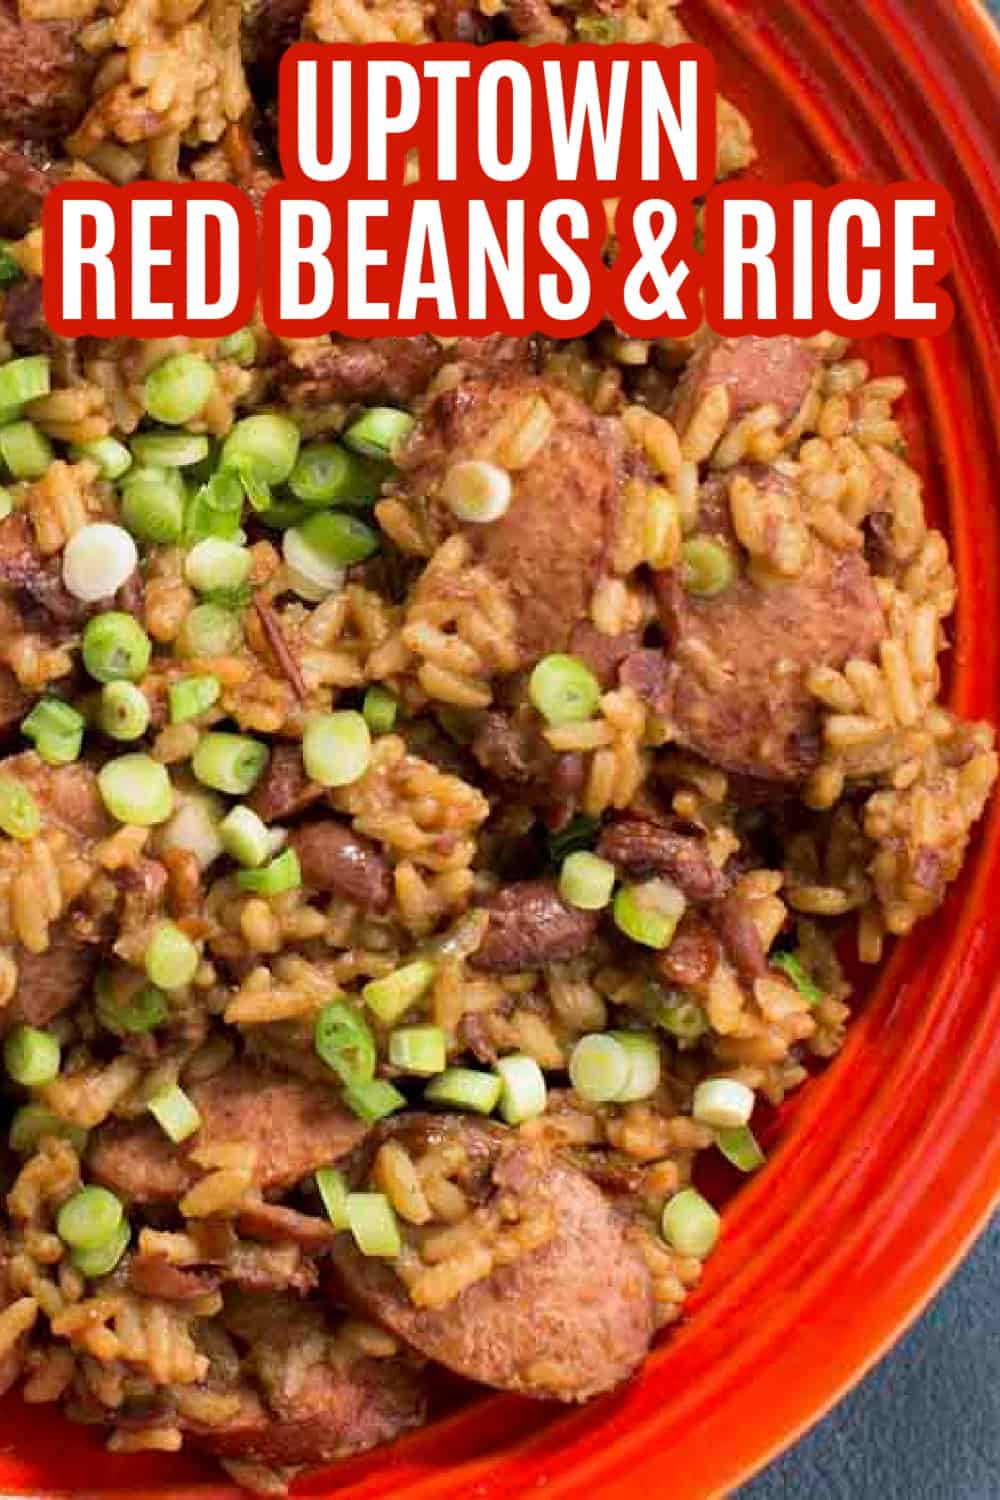 https://thriftyjinxy.com/wp-content/uploads/2023/04/Uptown-Red-Beans-and-Rice.jpg